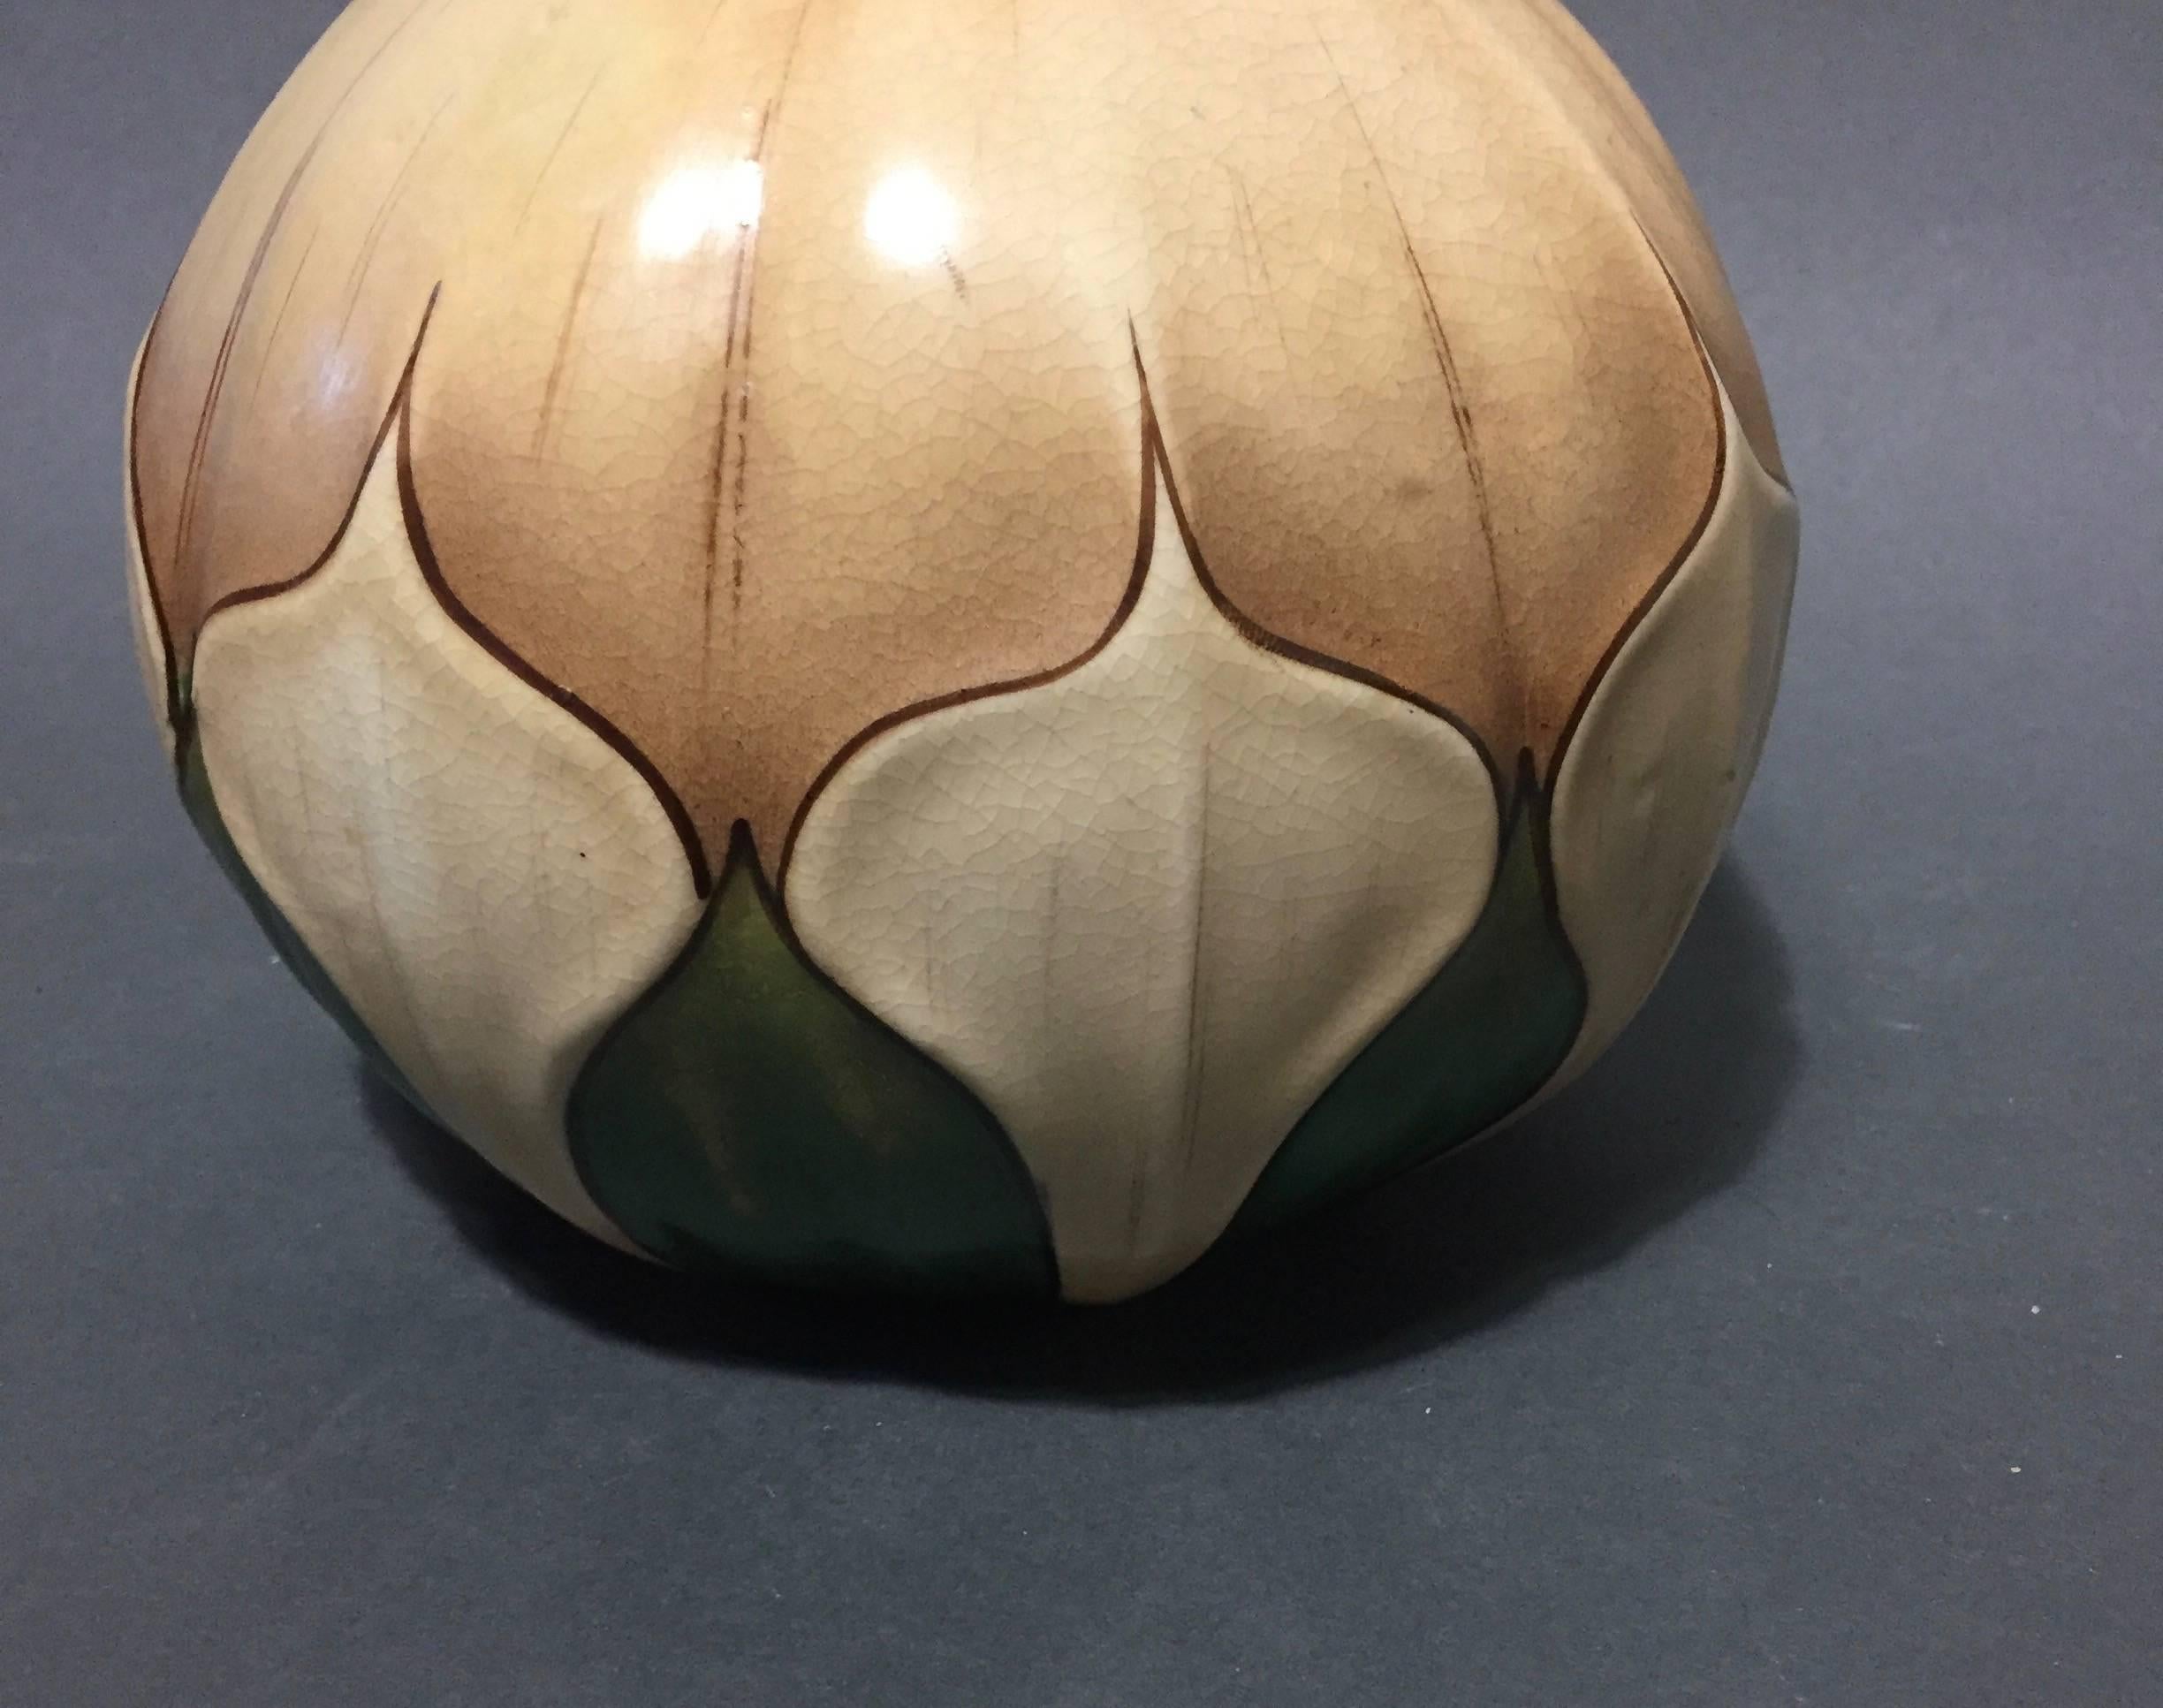 A unique and gorgeous ceramic vase in the shape of a double gourde with gold-gilt rim, Marked with the Amphora crown mark, Amphora oval, and Austria oval. Impressed 890. Condition (Near Mint), Vienna, Austria, circa 1910.